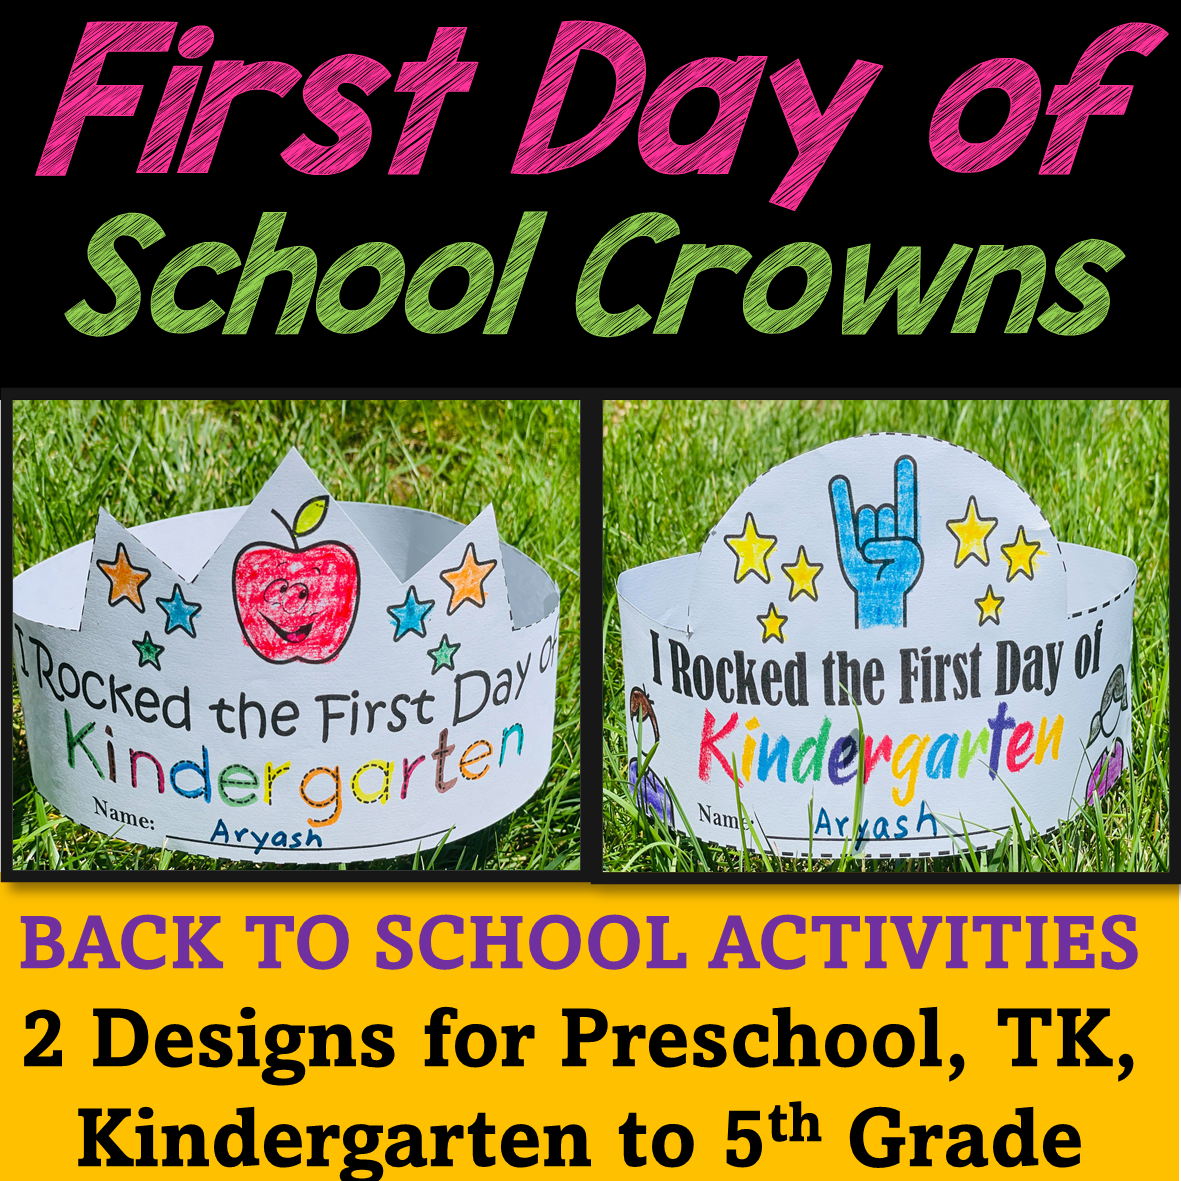 First Day of School Crown/ Hats for Preschool, TK to 5th Grade| Back to School